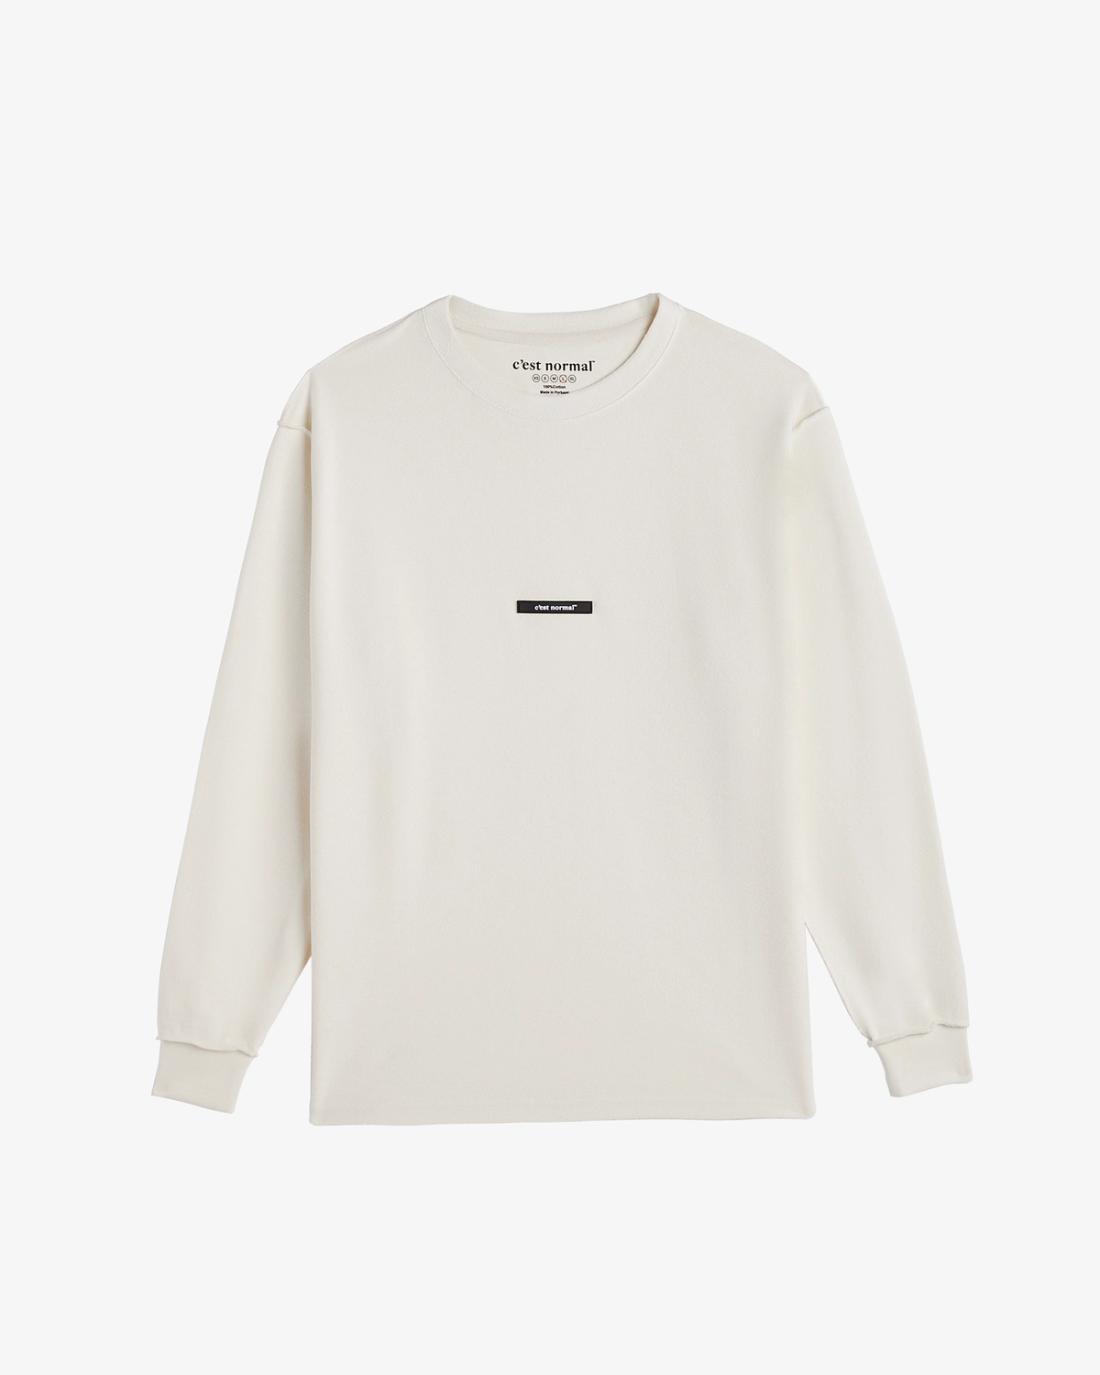 The Inside-Out Long Sleeve T